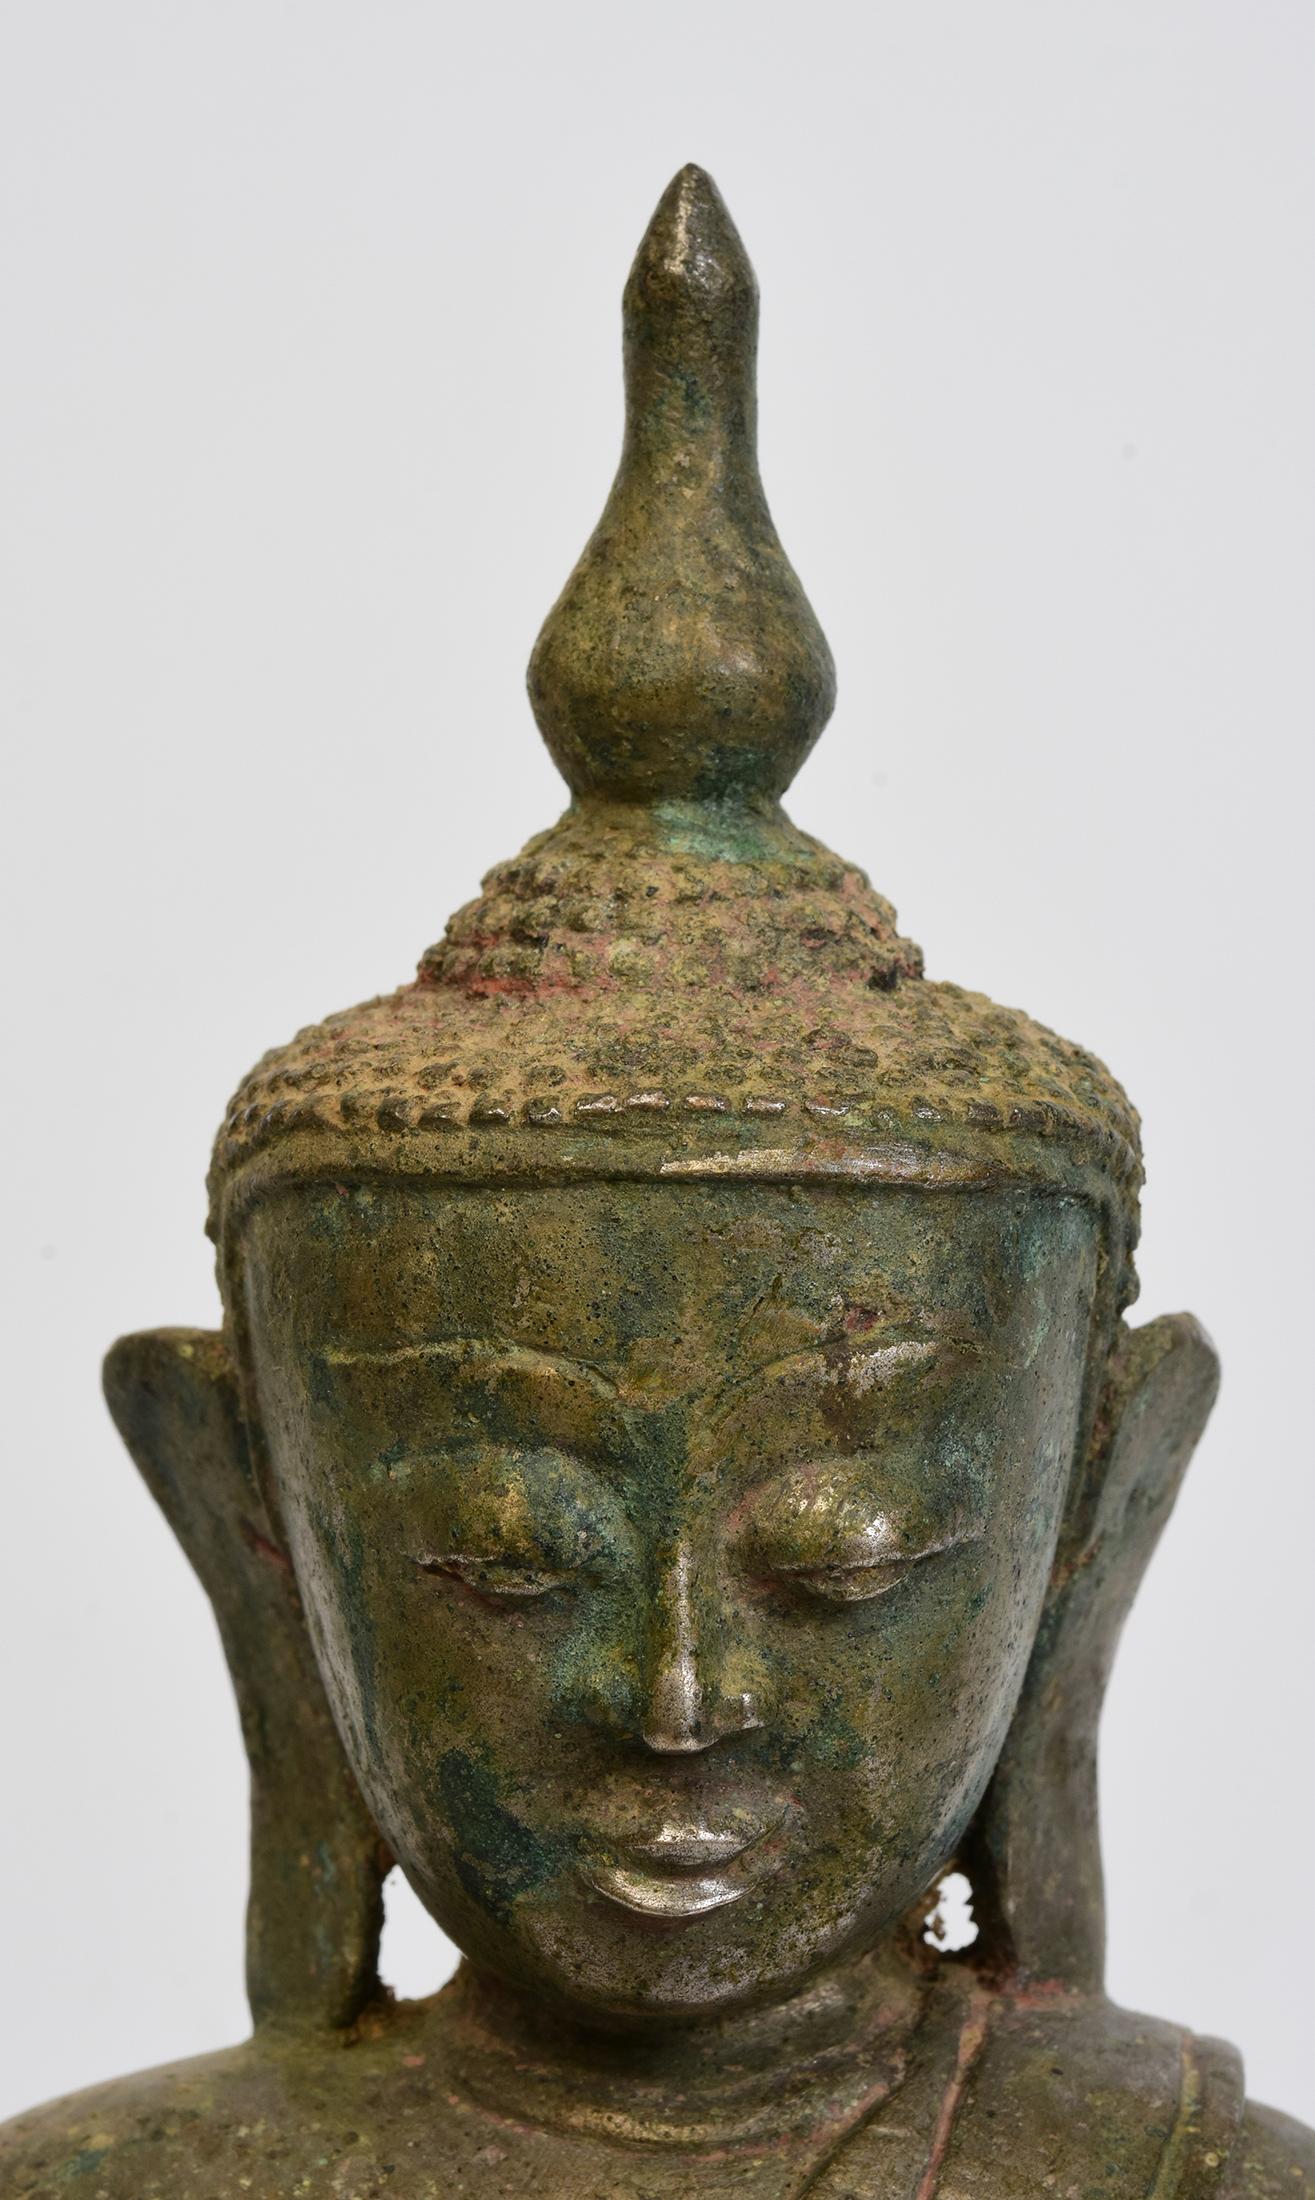 Antique Burmese bronze Buddha sitting in Mara Vijaya (calling the earth to witness) posture on double lotus base.

Age: Burma, Shan Period, 16th Century
Size: Height 31.7 C.M. / Width 18.6 C.M. / Depth 13 C.M.
Condition: Nice condition overall (some